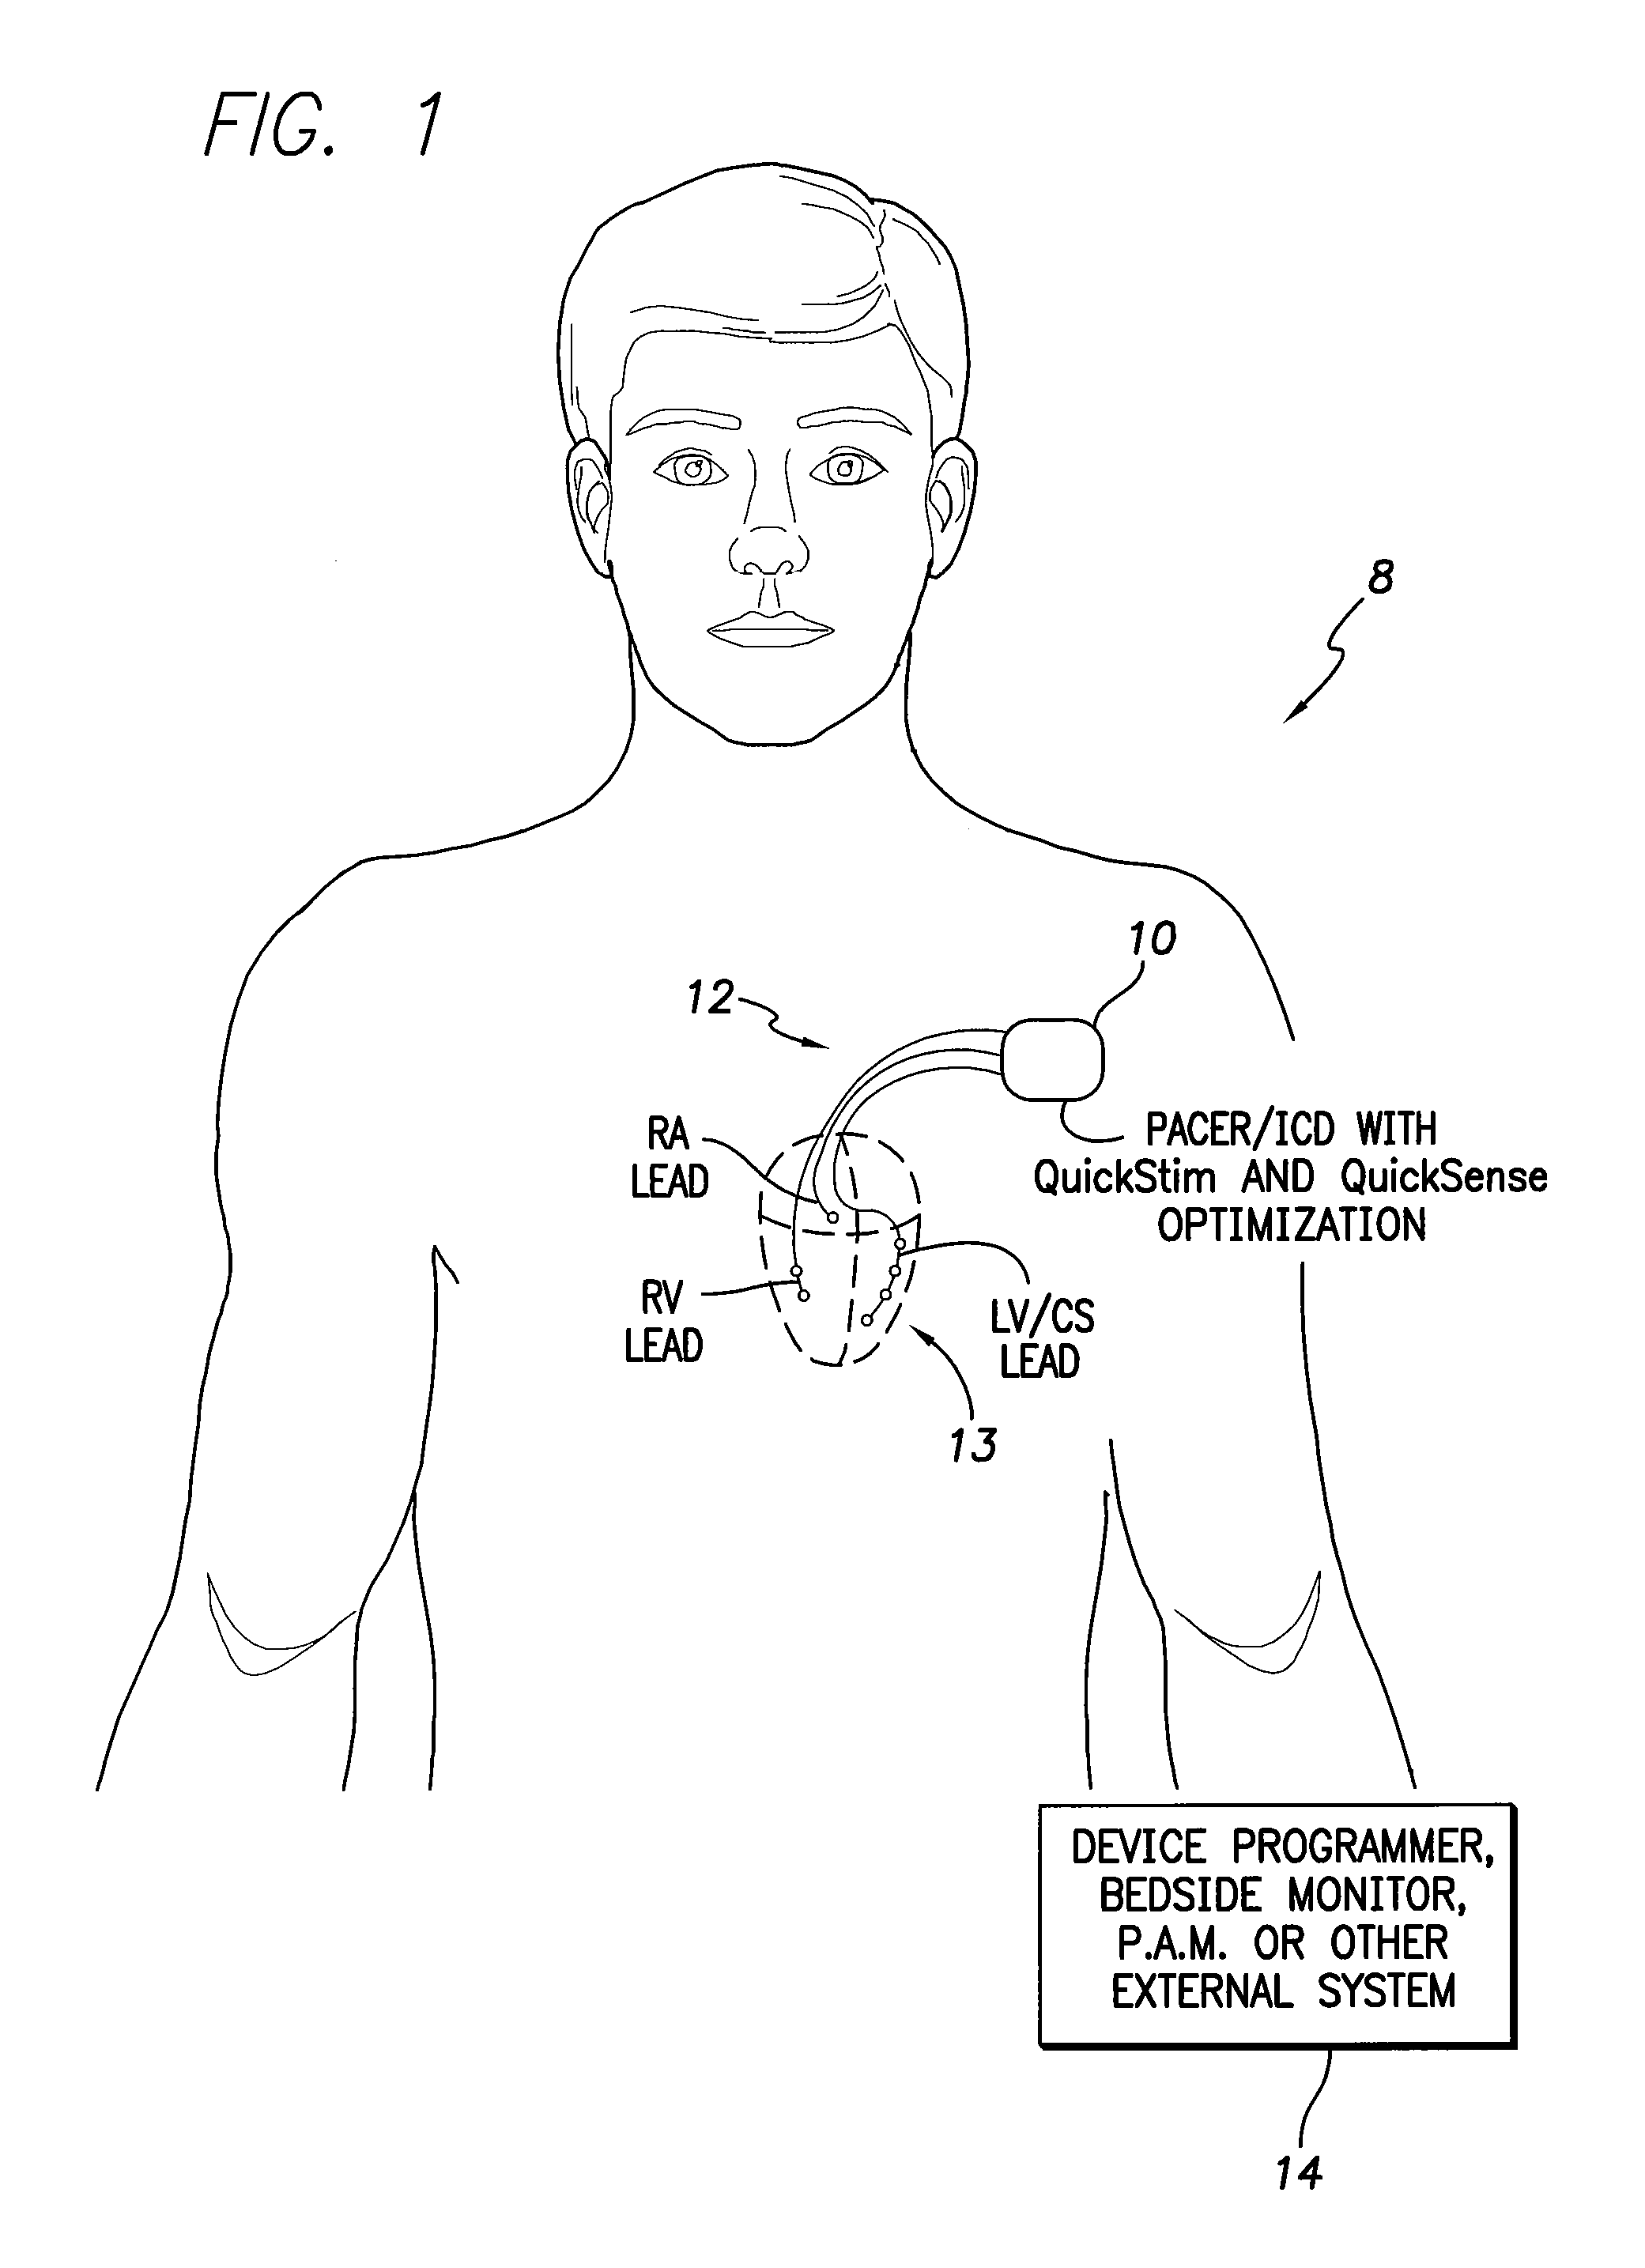 Systems and methods for optimizing multi-site cardiac pacing and sensing configurations for use with an implantable medical device